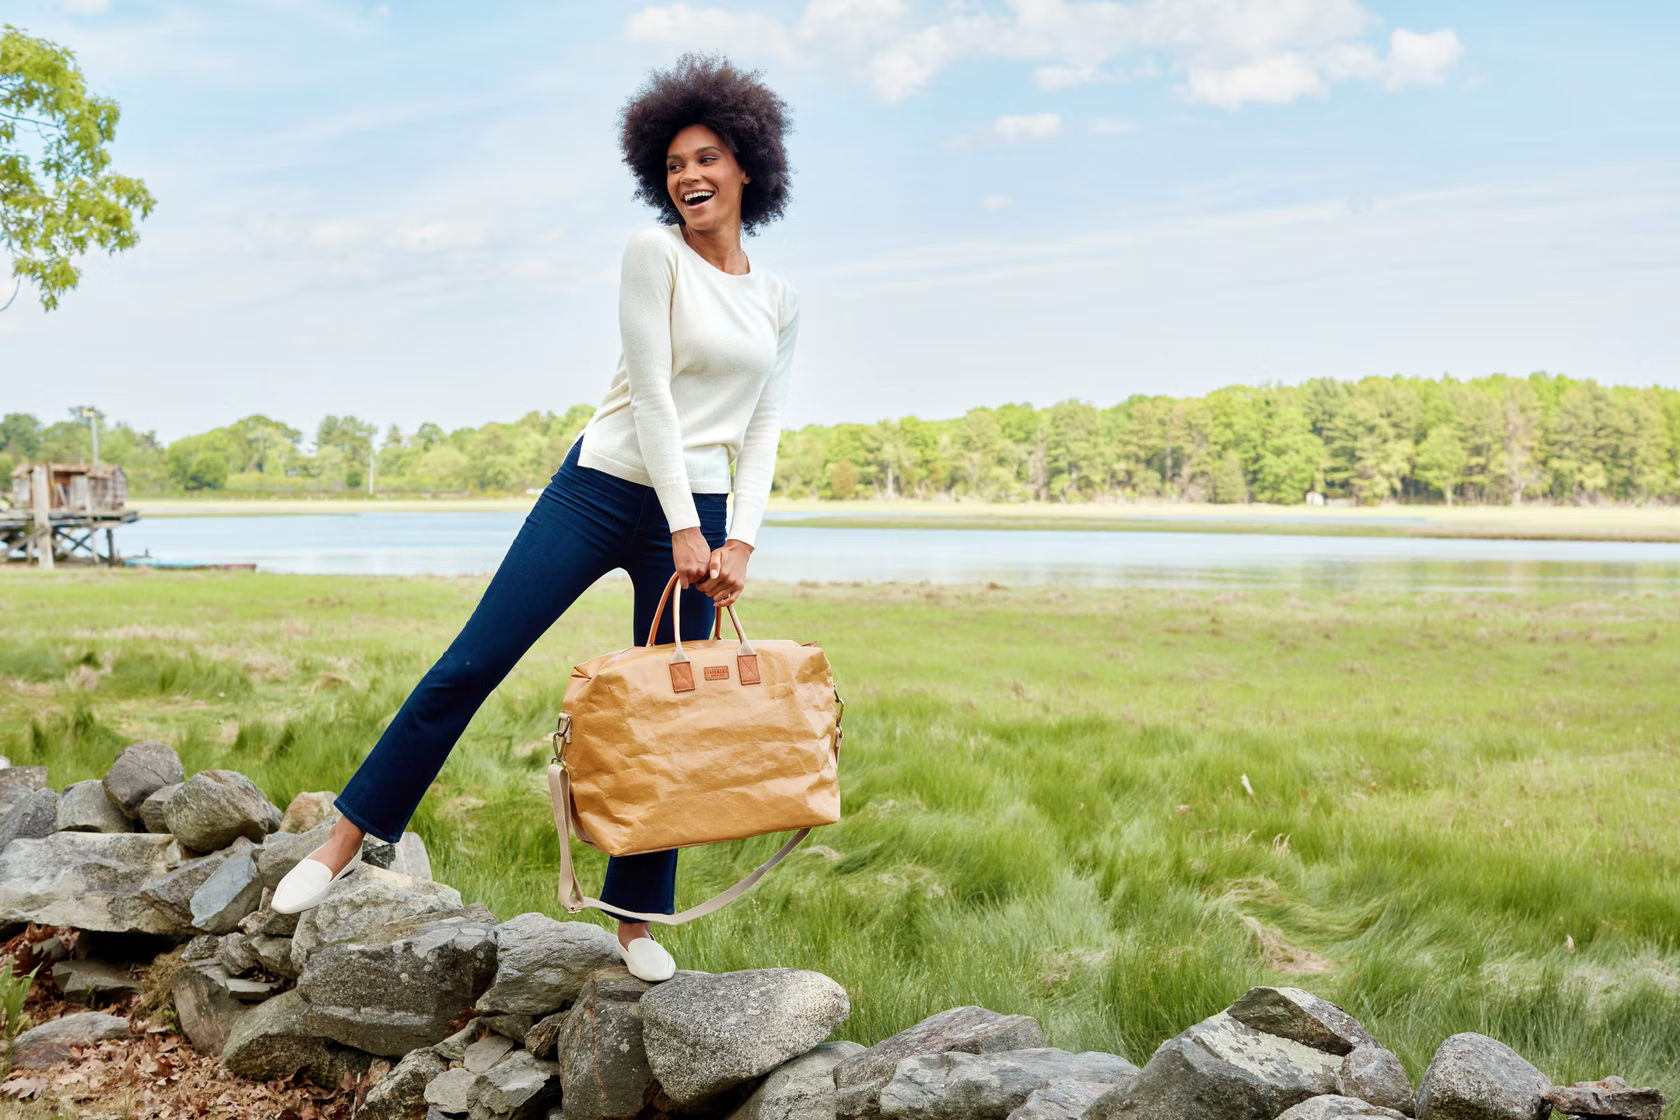 A smiling woman is shown stepping onto a rock wall. She is carrying a brown washable paper holdall.